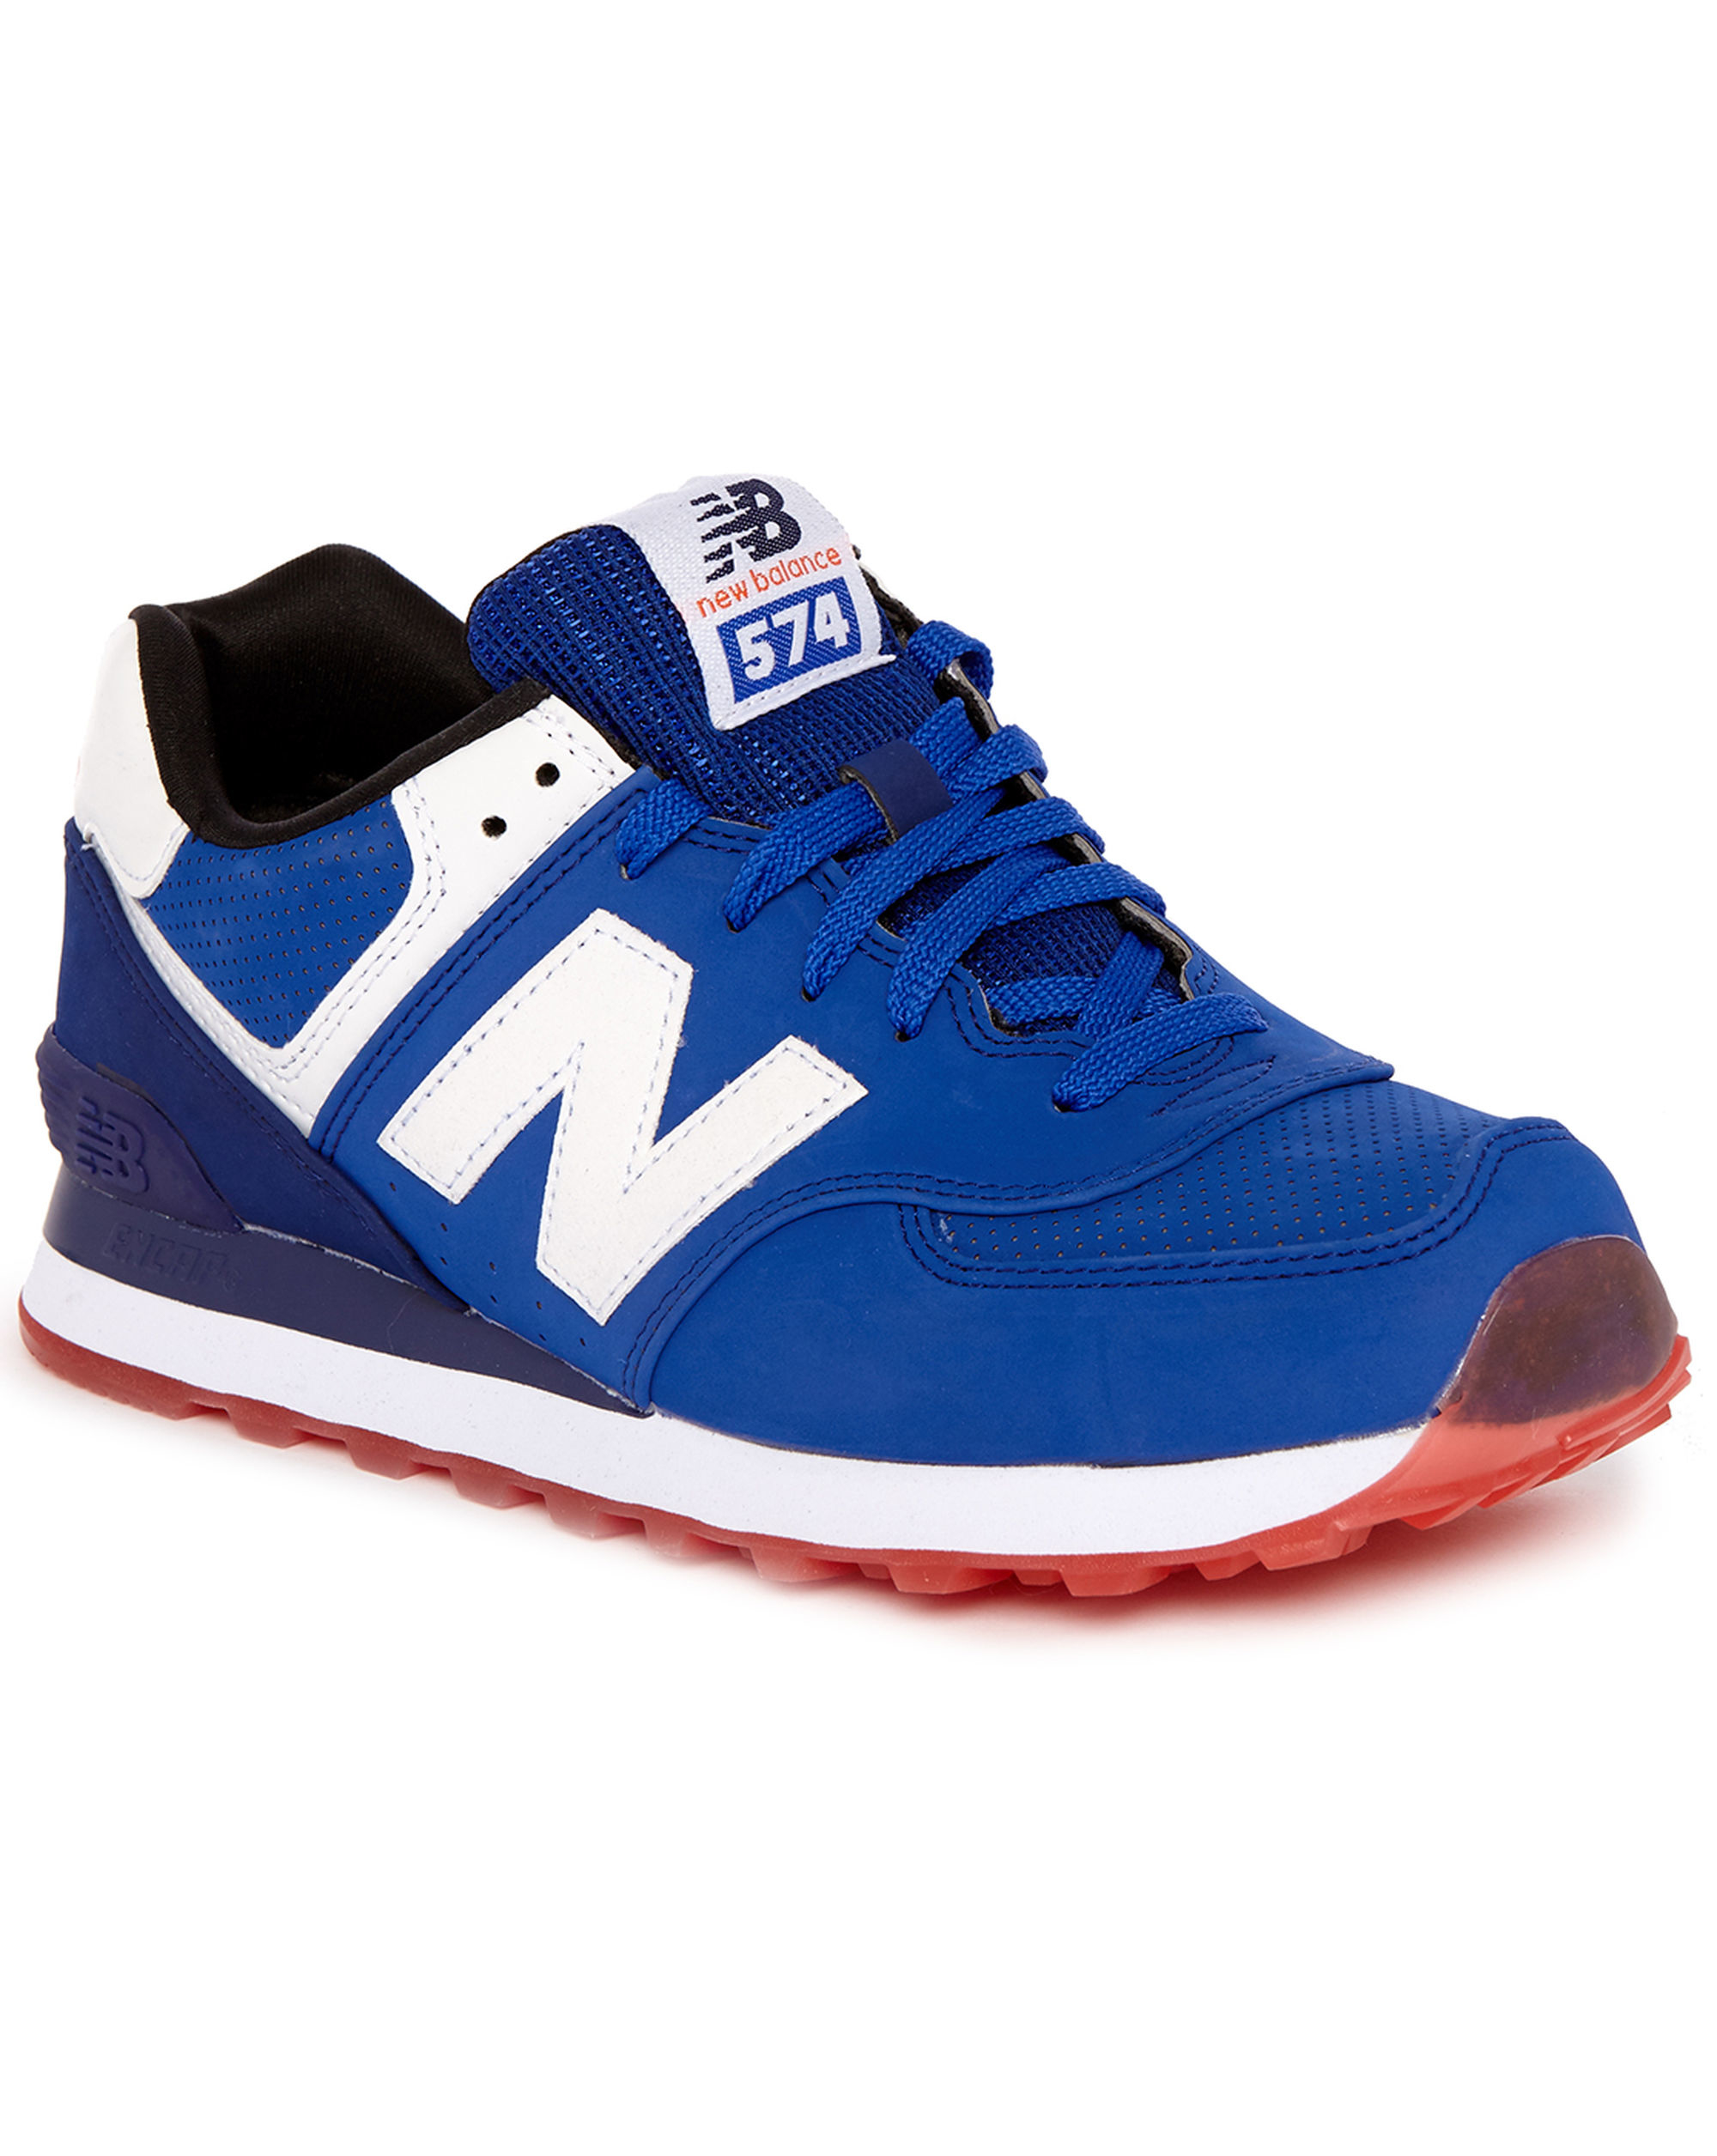 New balance Blue And Red Ml574 Sneakers in Blue for Men Lyst